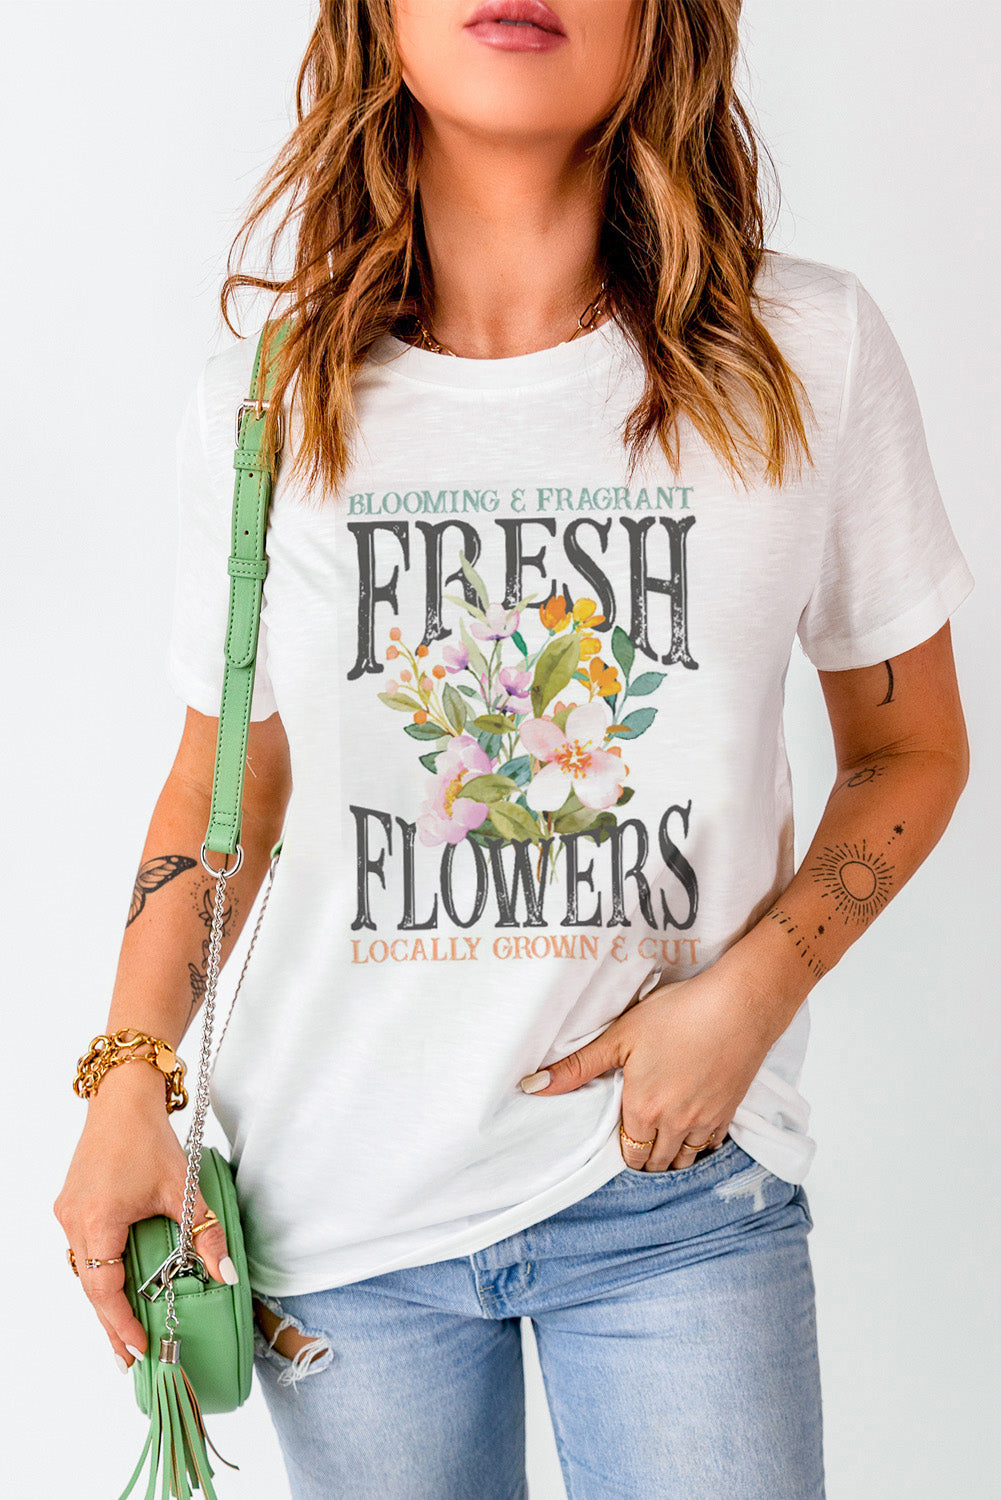 Explore More Collection - FRESH FLOWERS Round-Neck Tee